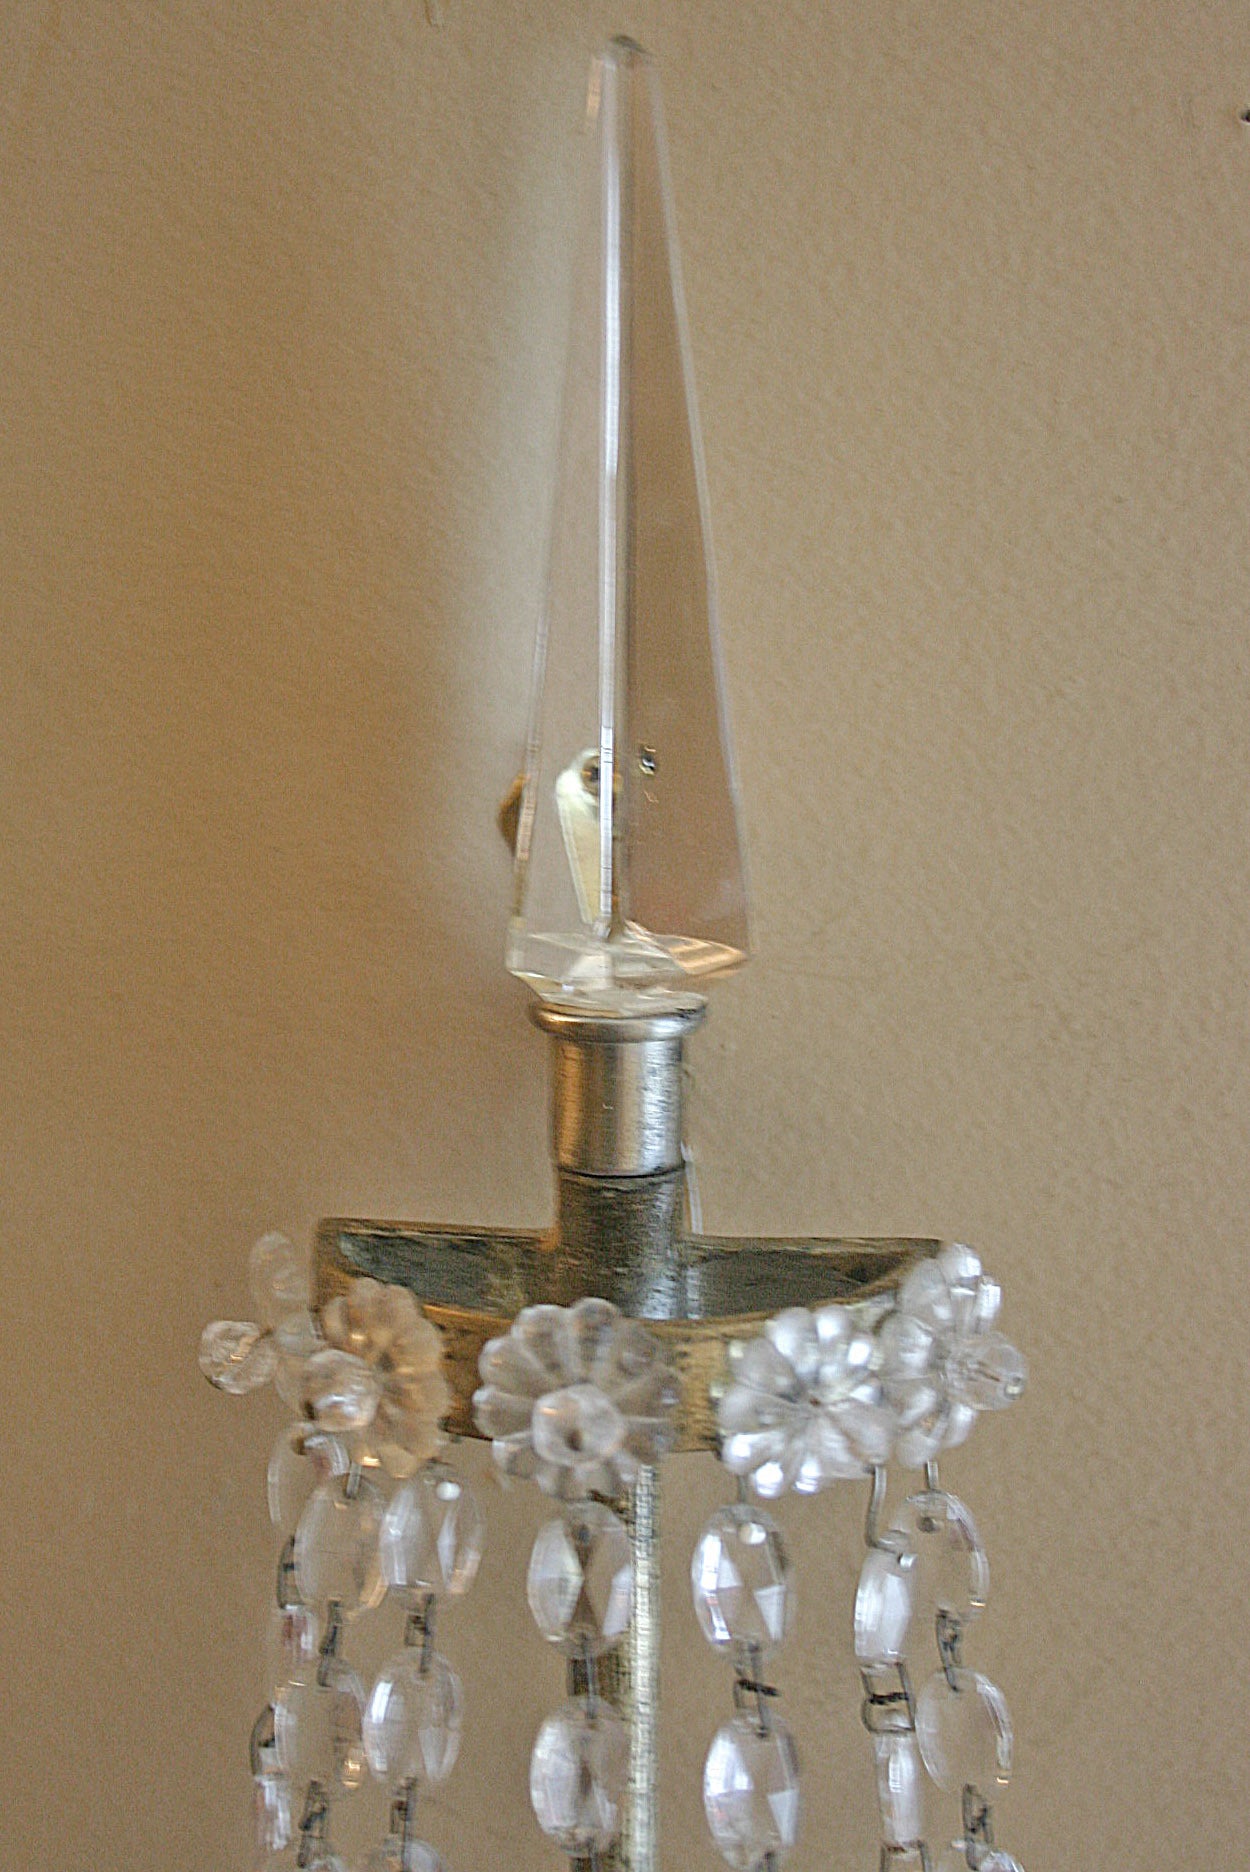 A pair of silver plated single light sconces with crystal body. Two interior lights, could be wired to four interior lights.
Measures: 23